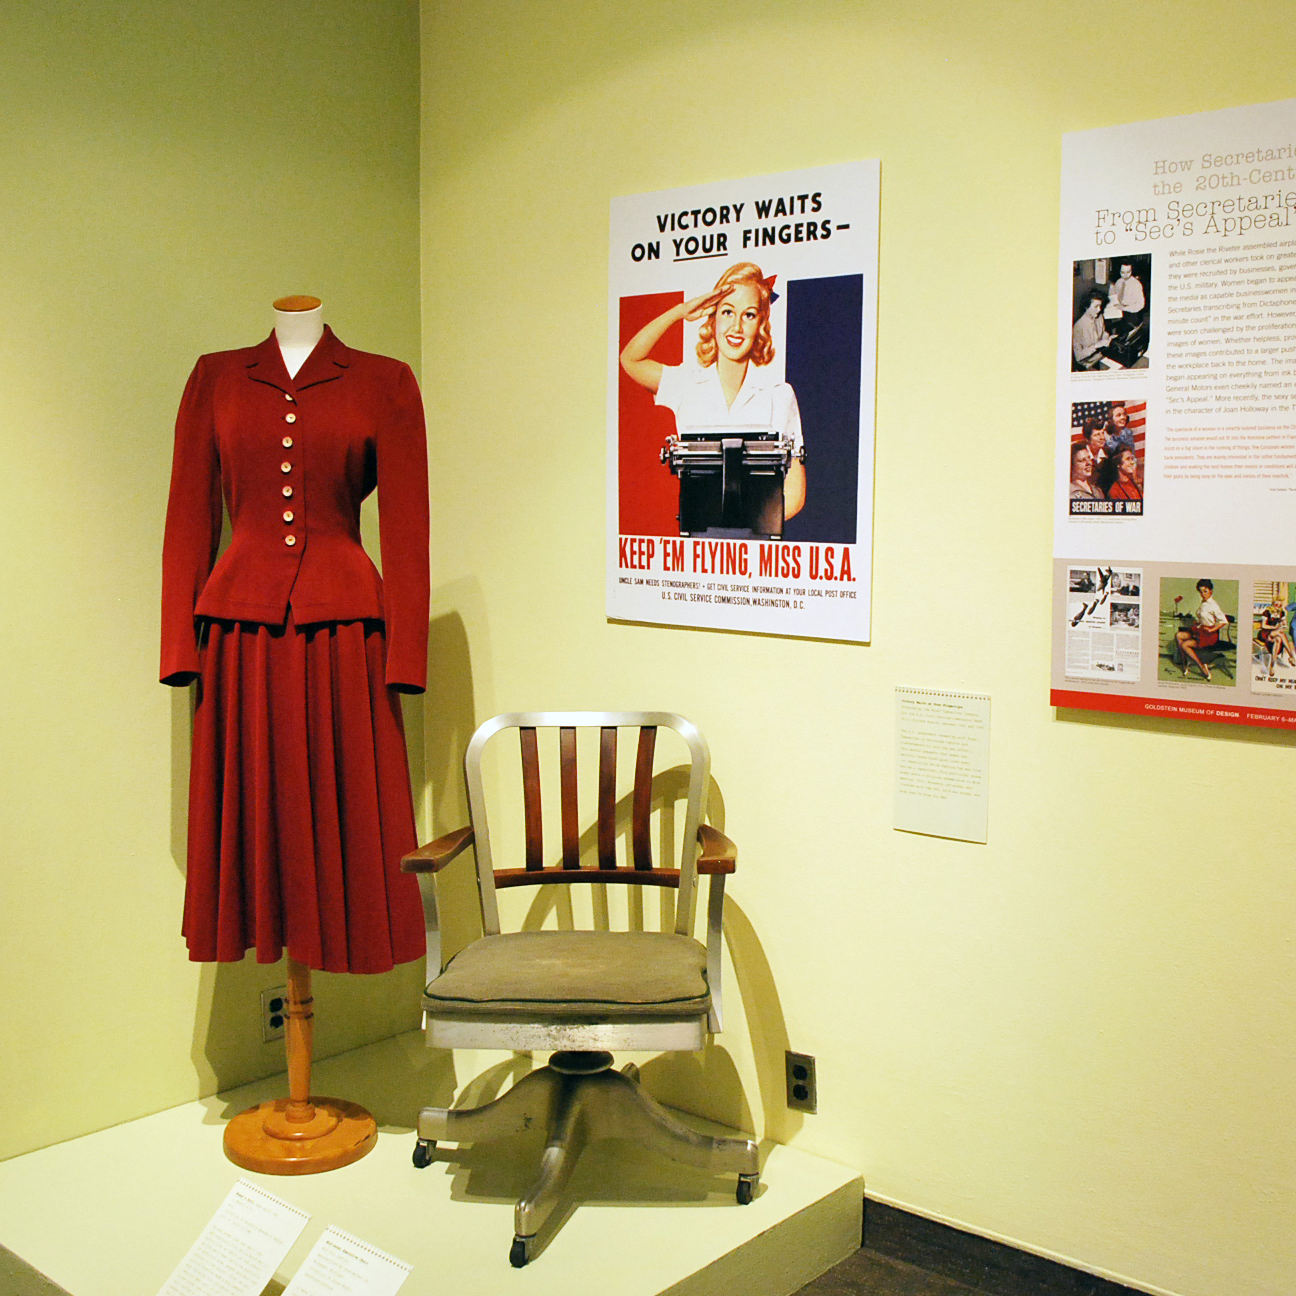 How Secretaries Changed the 20th-Century office: Design, Image, and Culture exhibition with posters, clothing, and furniture on display